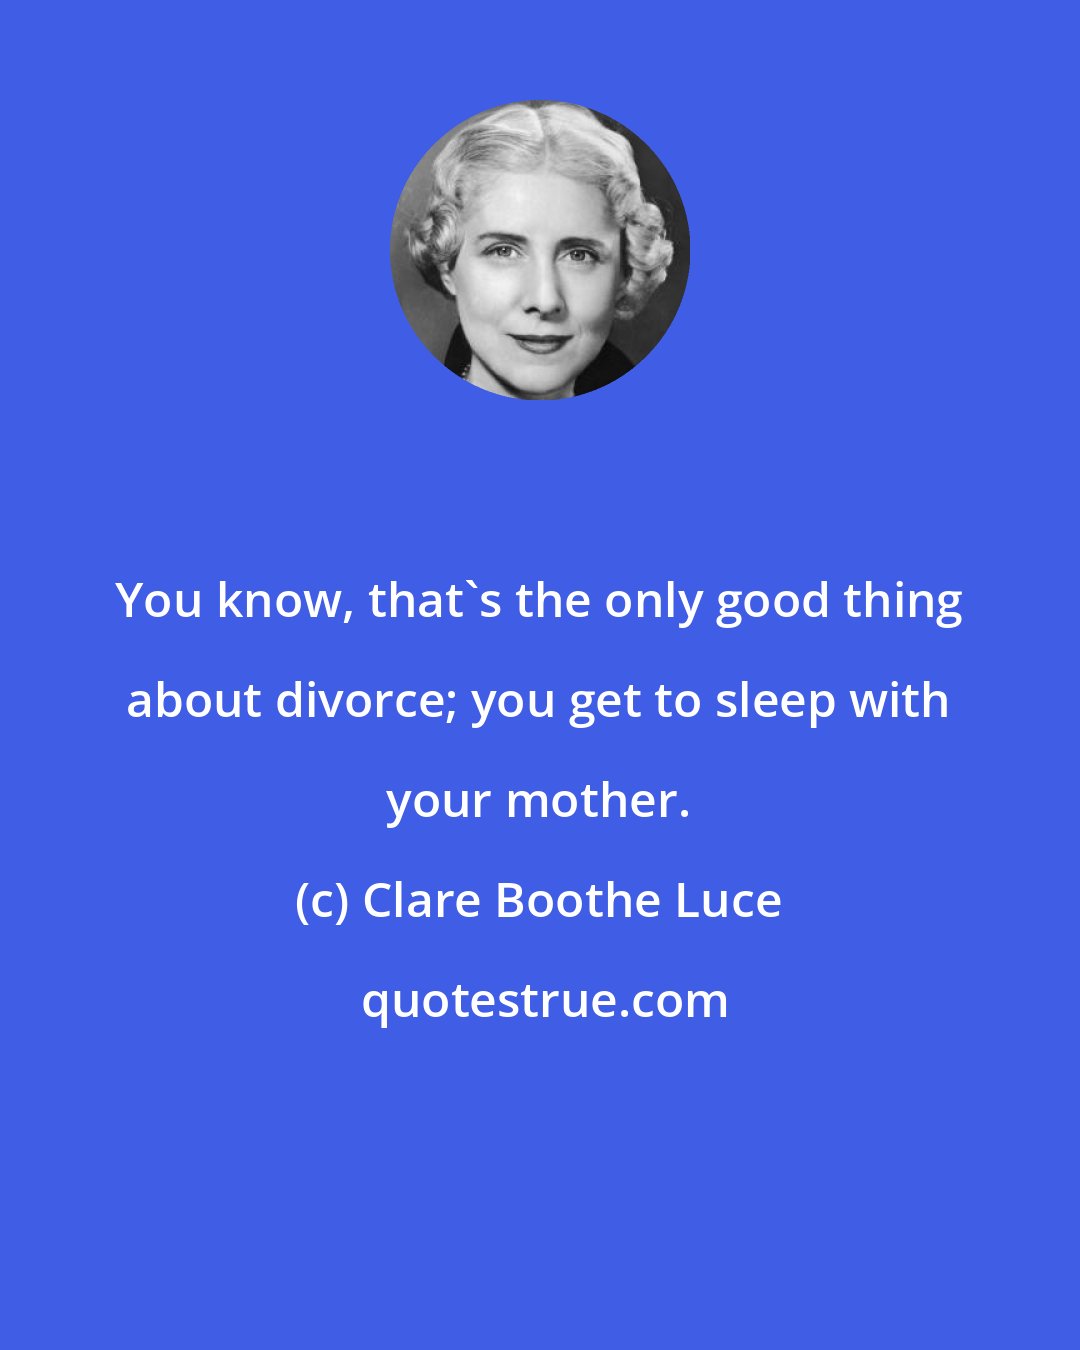 Clare Boothe Luce: You know, that's the only good thing about divorce; you get to sleep with your mother.